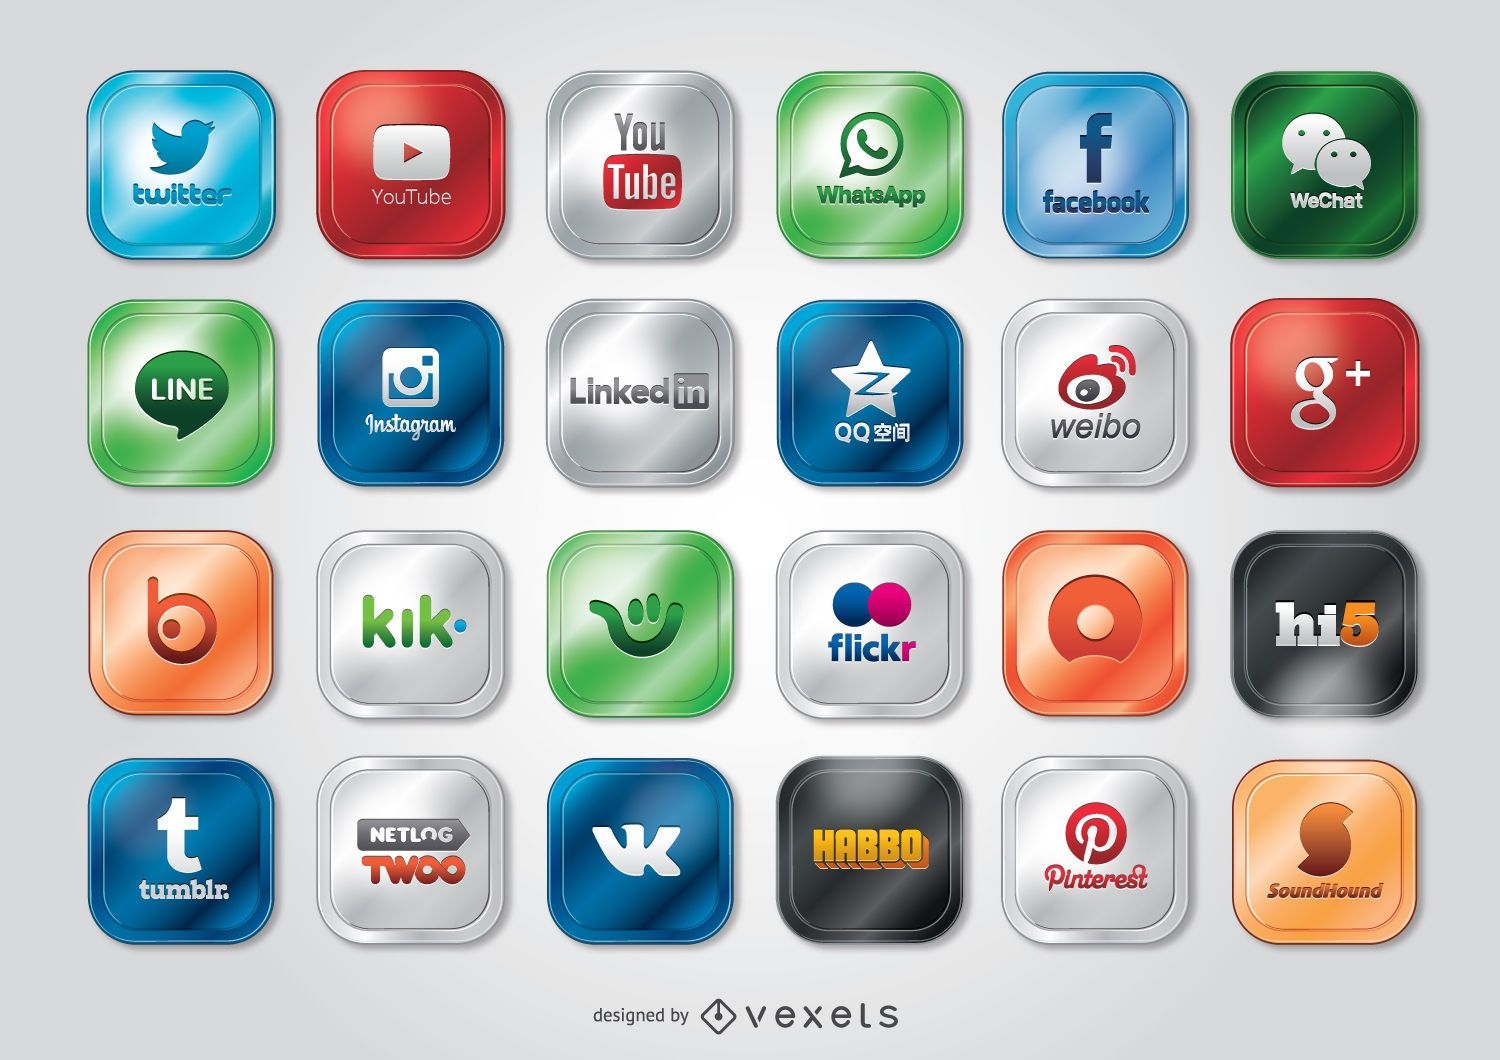 Social media sites and apps icons and logos